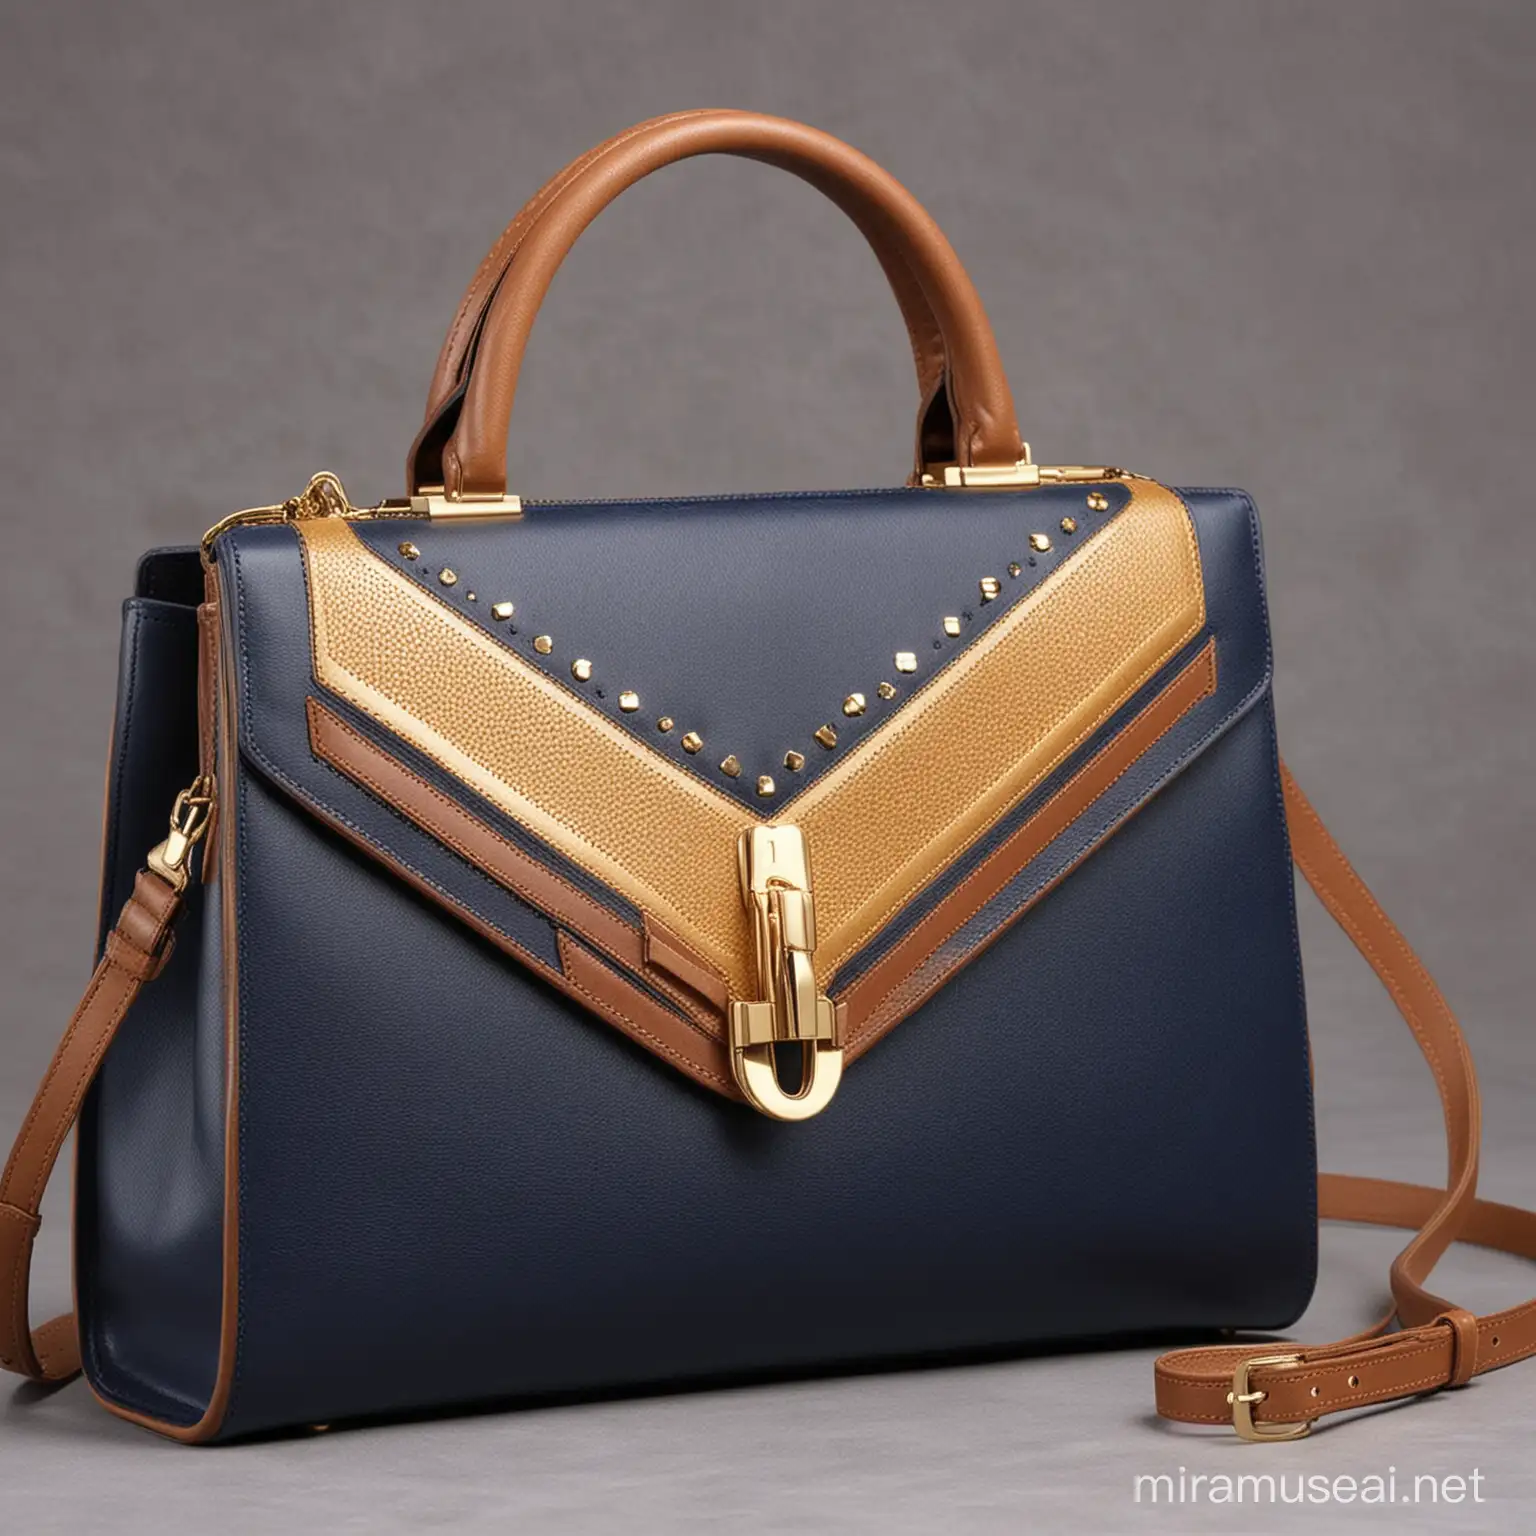 Classy and Elegant Navy Blue Brown and Gold Leather Purse Bag Design